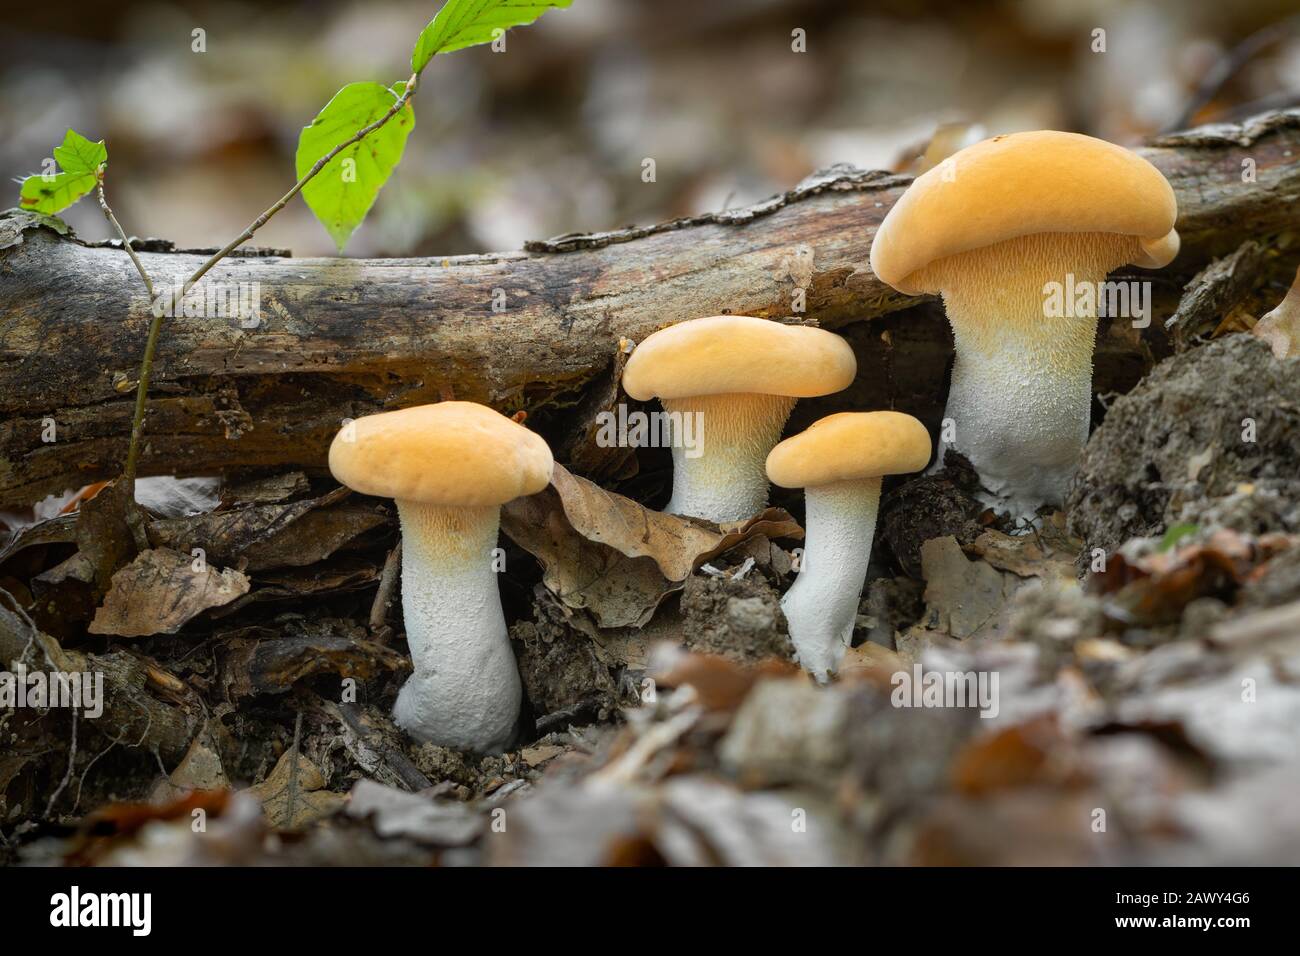 Excellent edible mushrooms of yellow color, which is a decoration of the forest Stock Photo